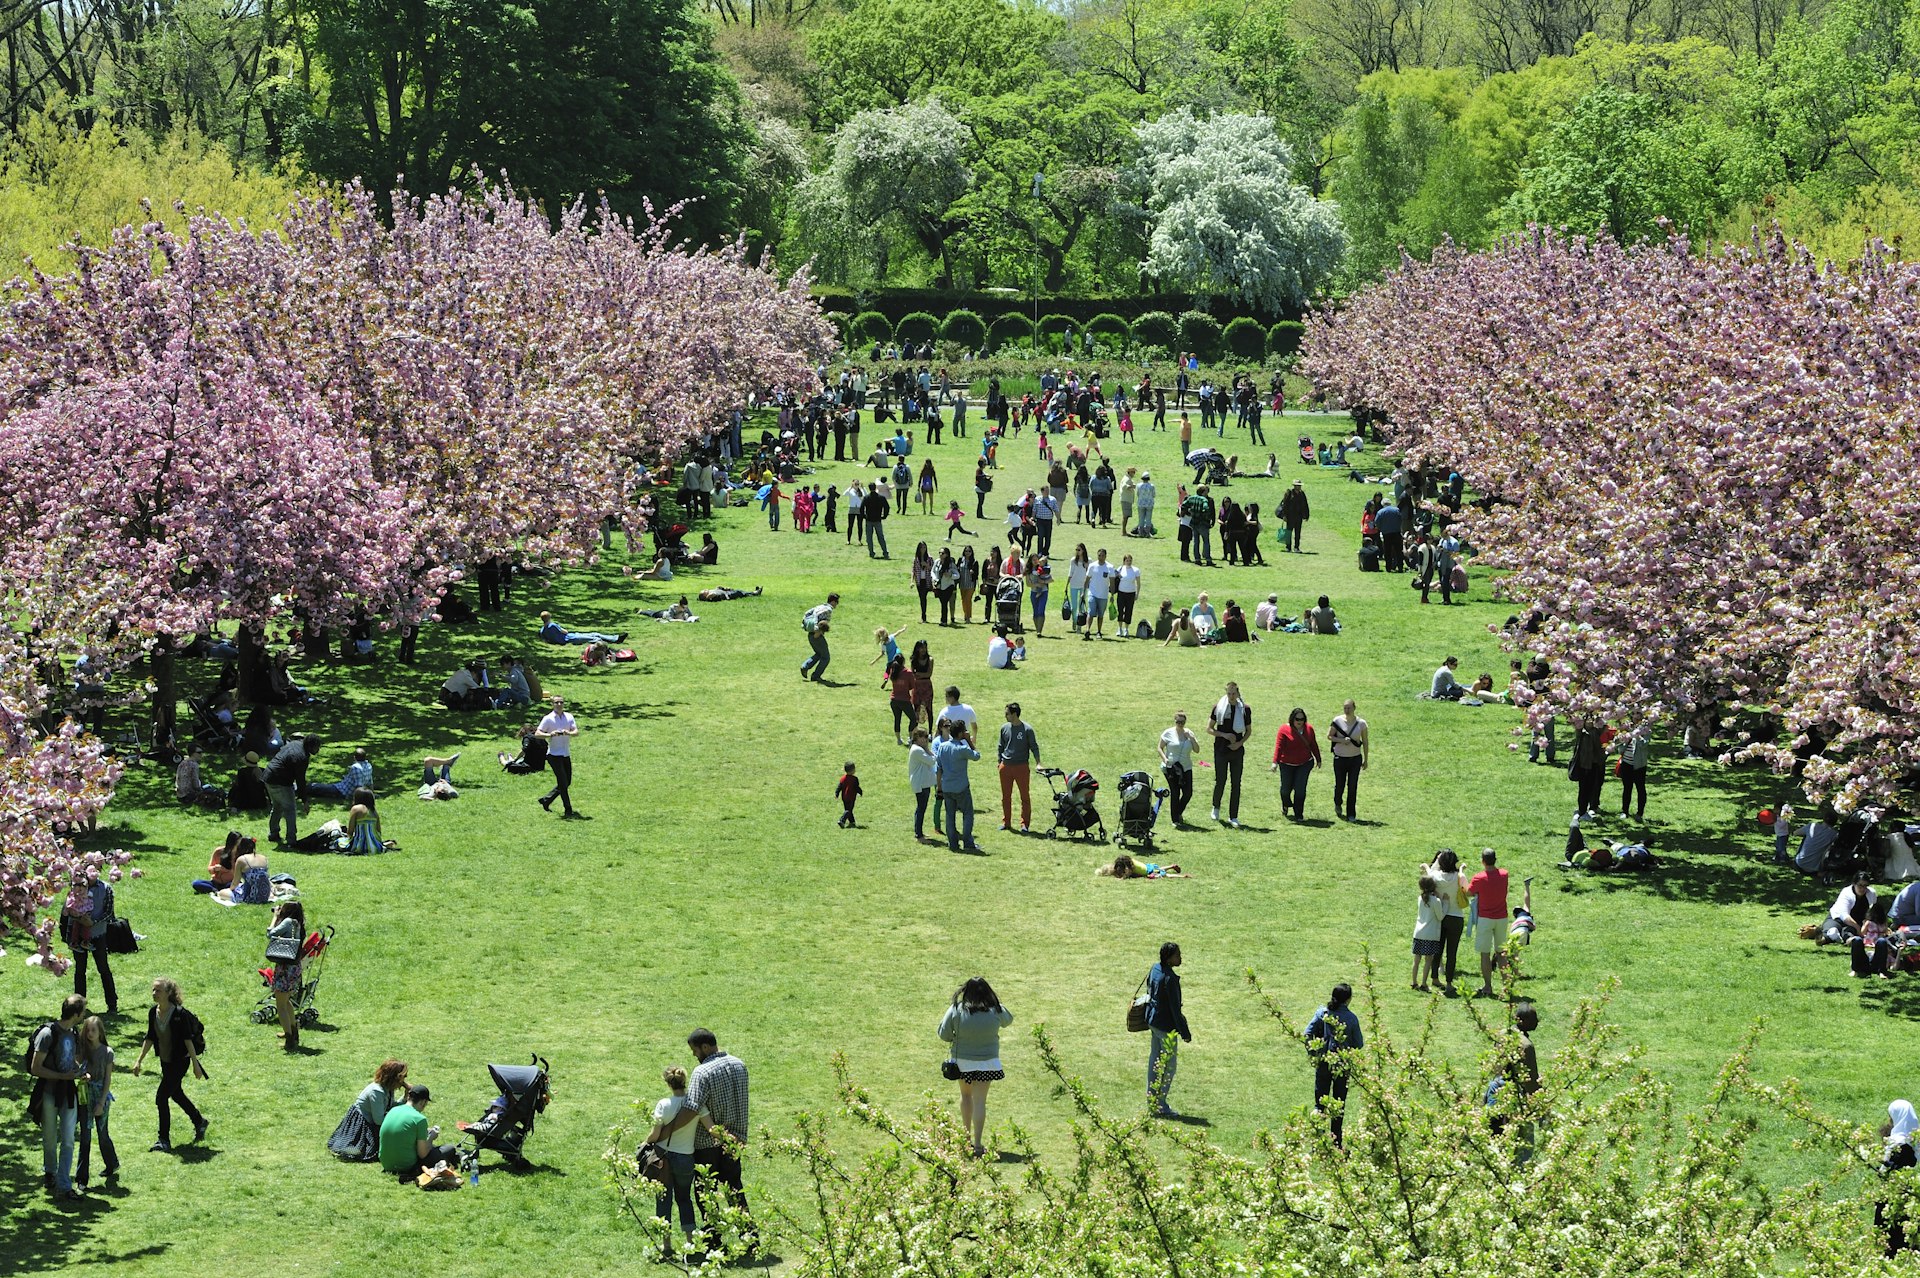 People sit on a lawn on a sunny day enjoying the pink blossoms from the many nearby cherry trees